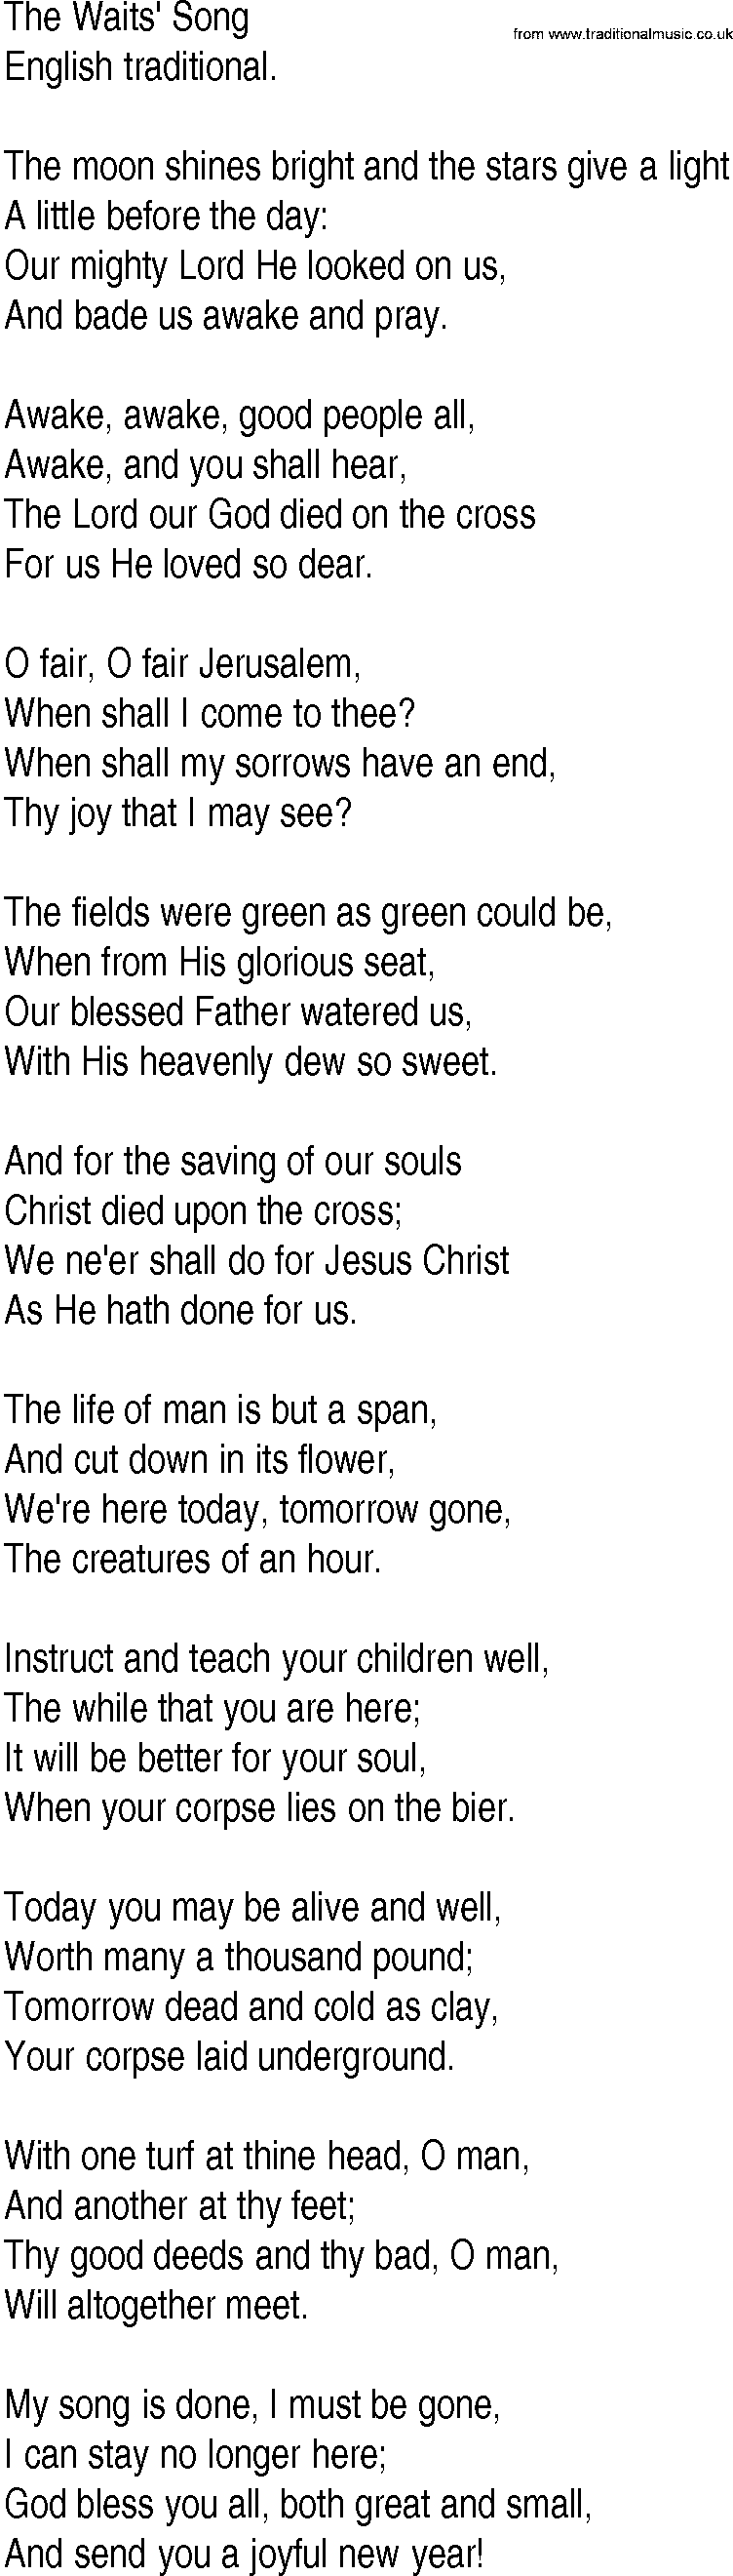 Hymn and Gospel Song: The Waits' Song by English traditional lyrics